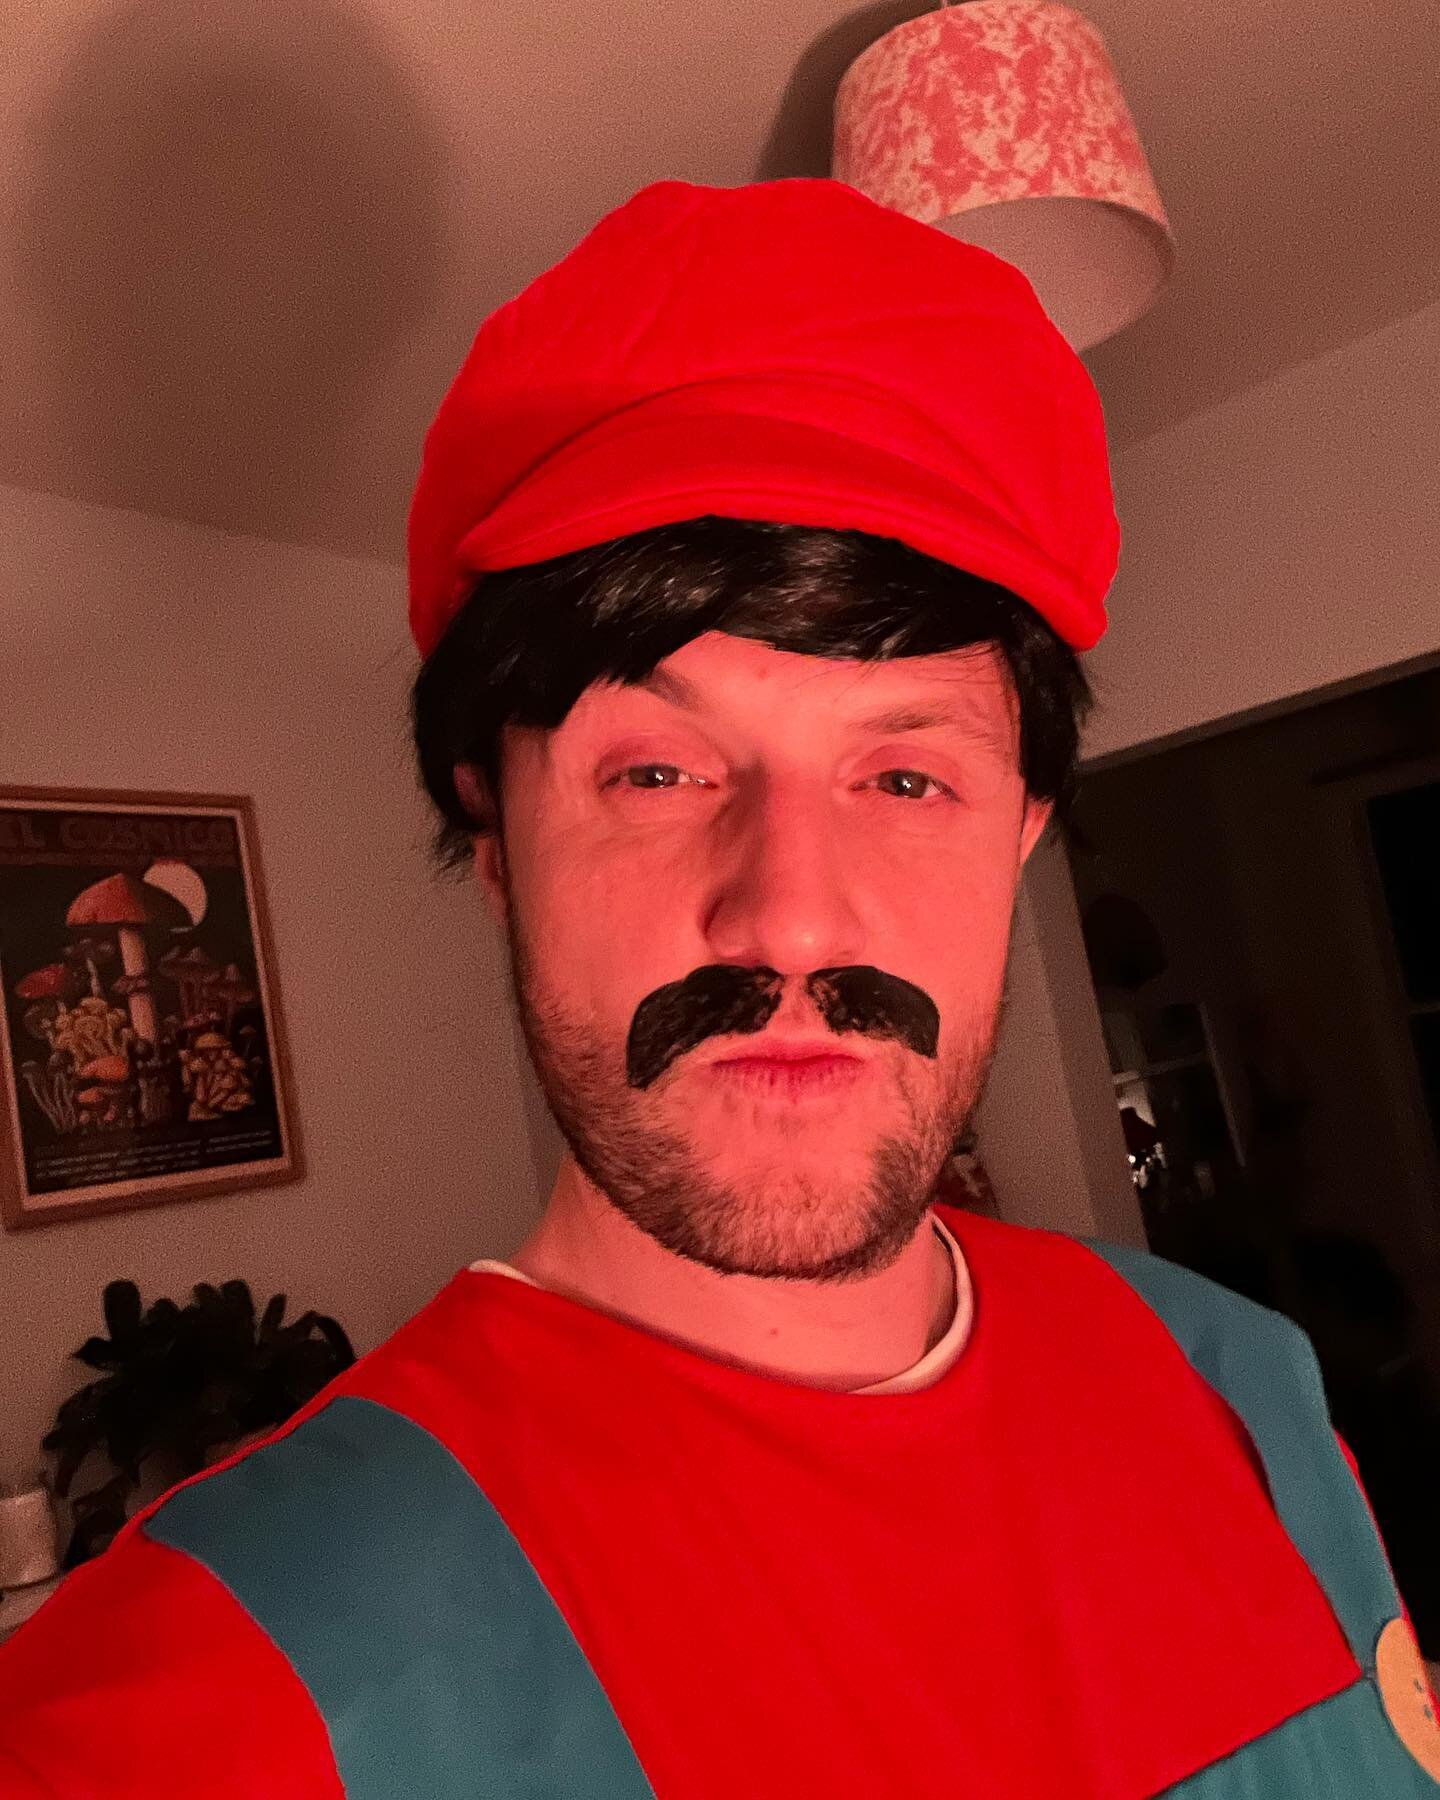 POV you&rsquo;ve had some 🍄and are unexpectedly &ldquo;feeling yourself&rdquo; dressed as Mario. (Photos from Halloween but forgot to post)